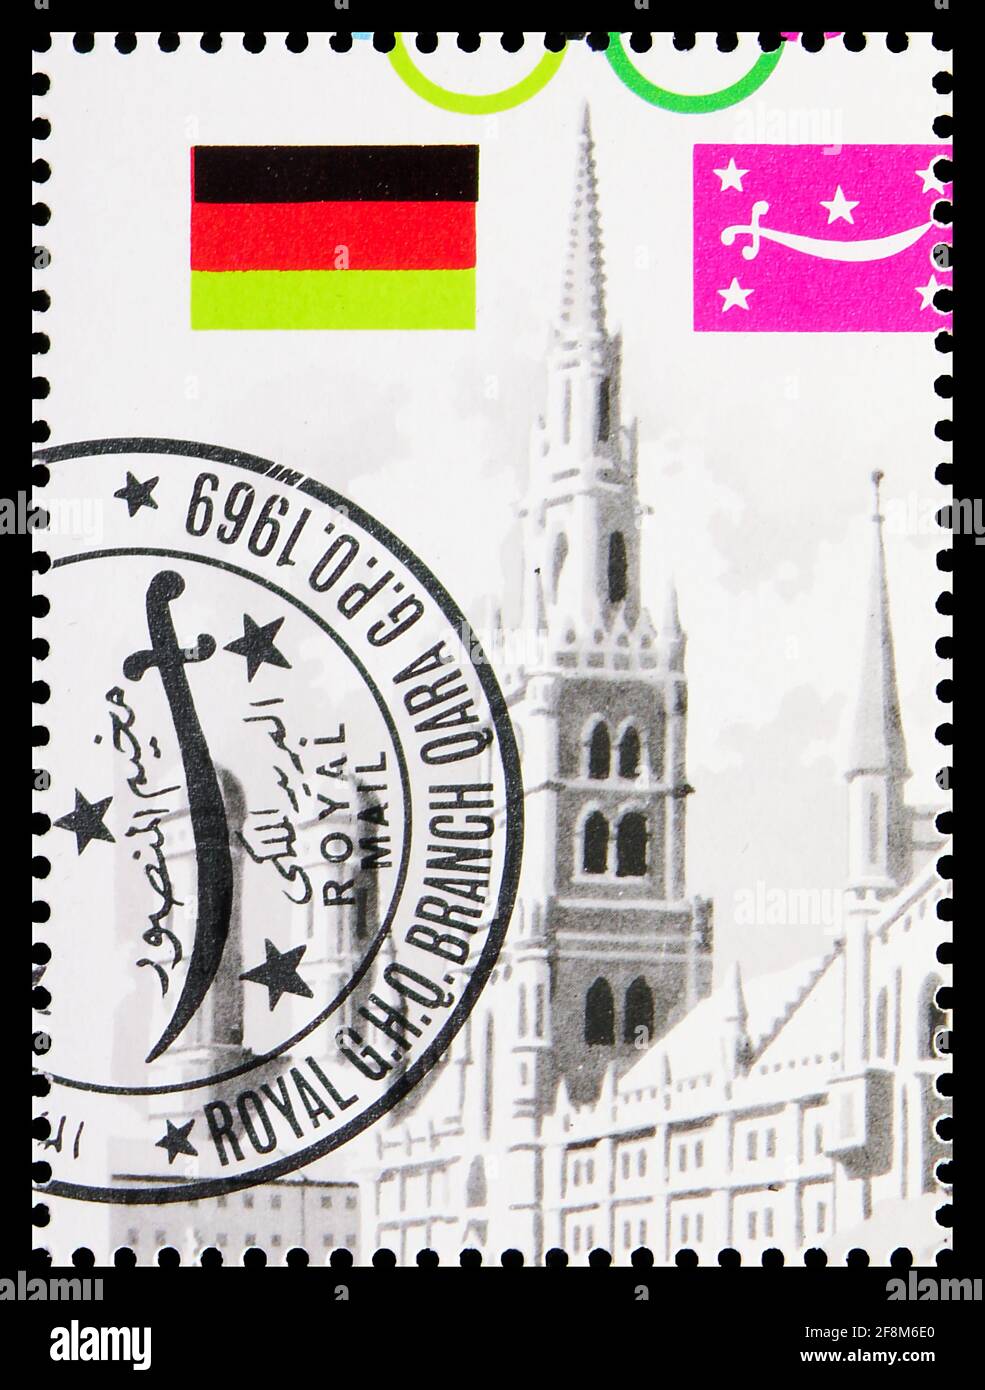 MOSCOW, RUSSIA - OCTOBER 5, 2019: Postage stamp printed in Yemen shows Building, Olympic Games, Munich serie, circa 1969 Stock Photo